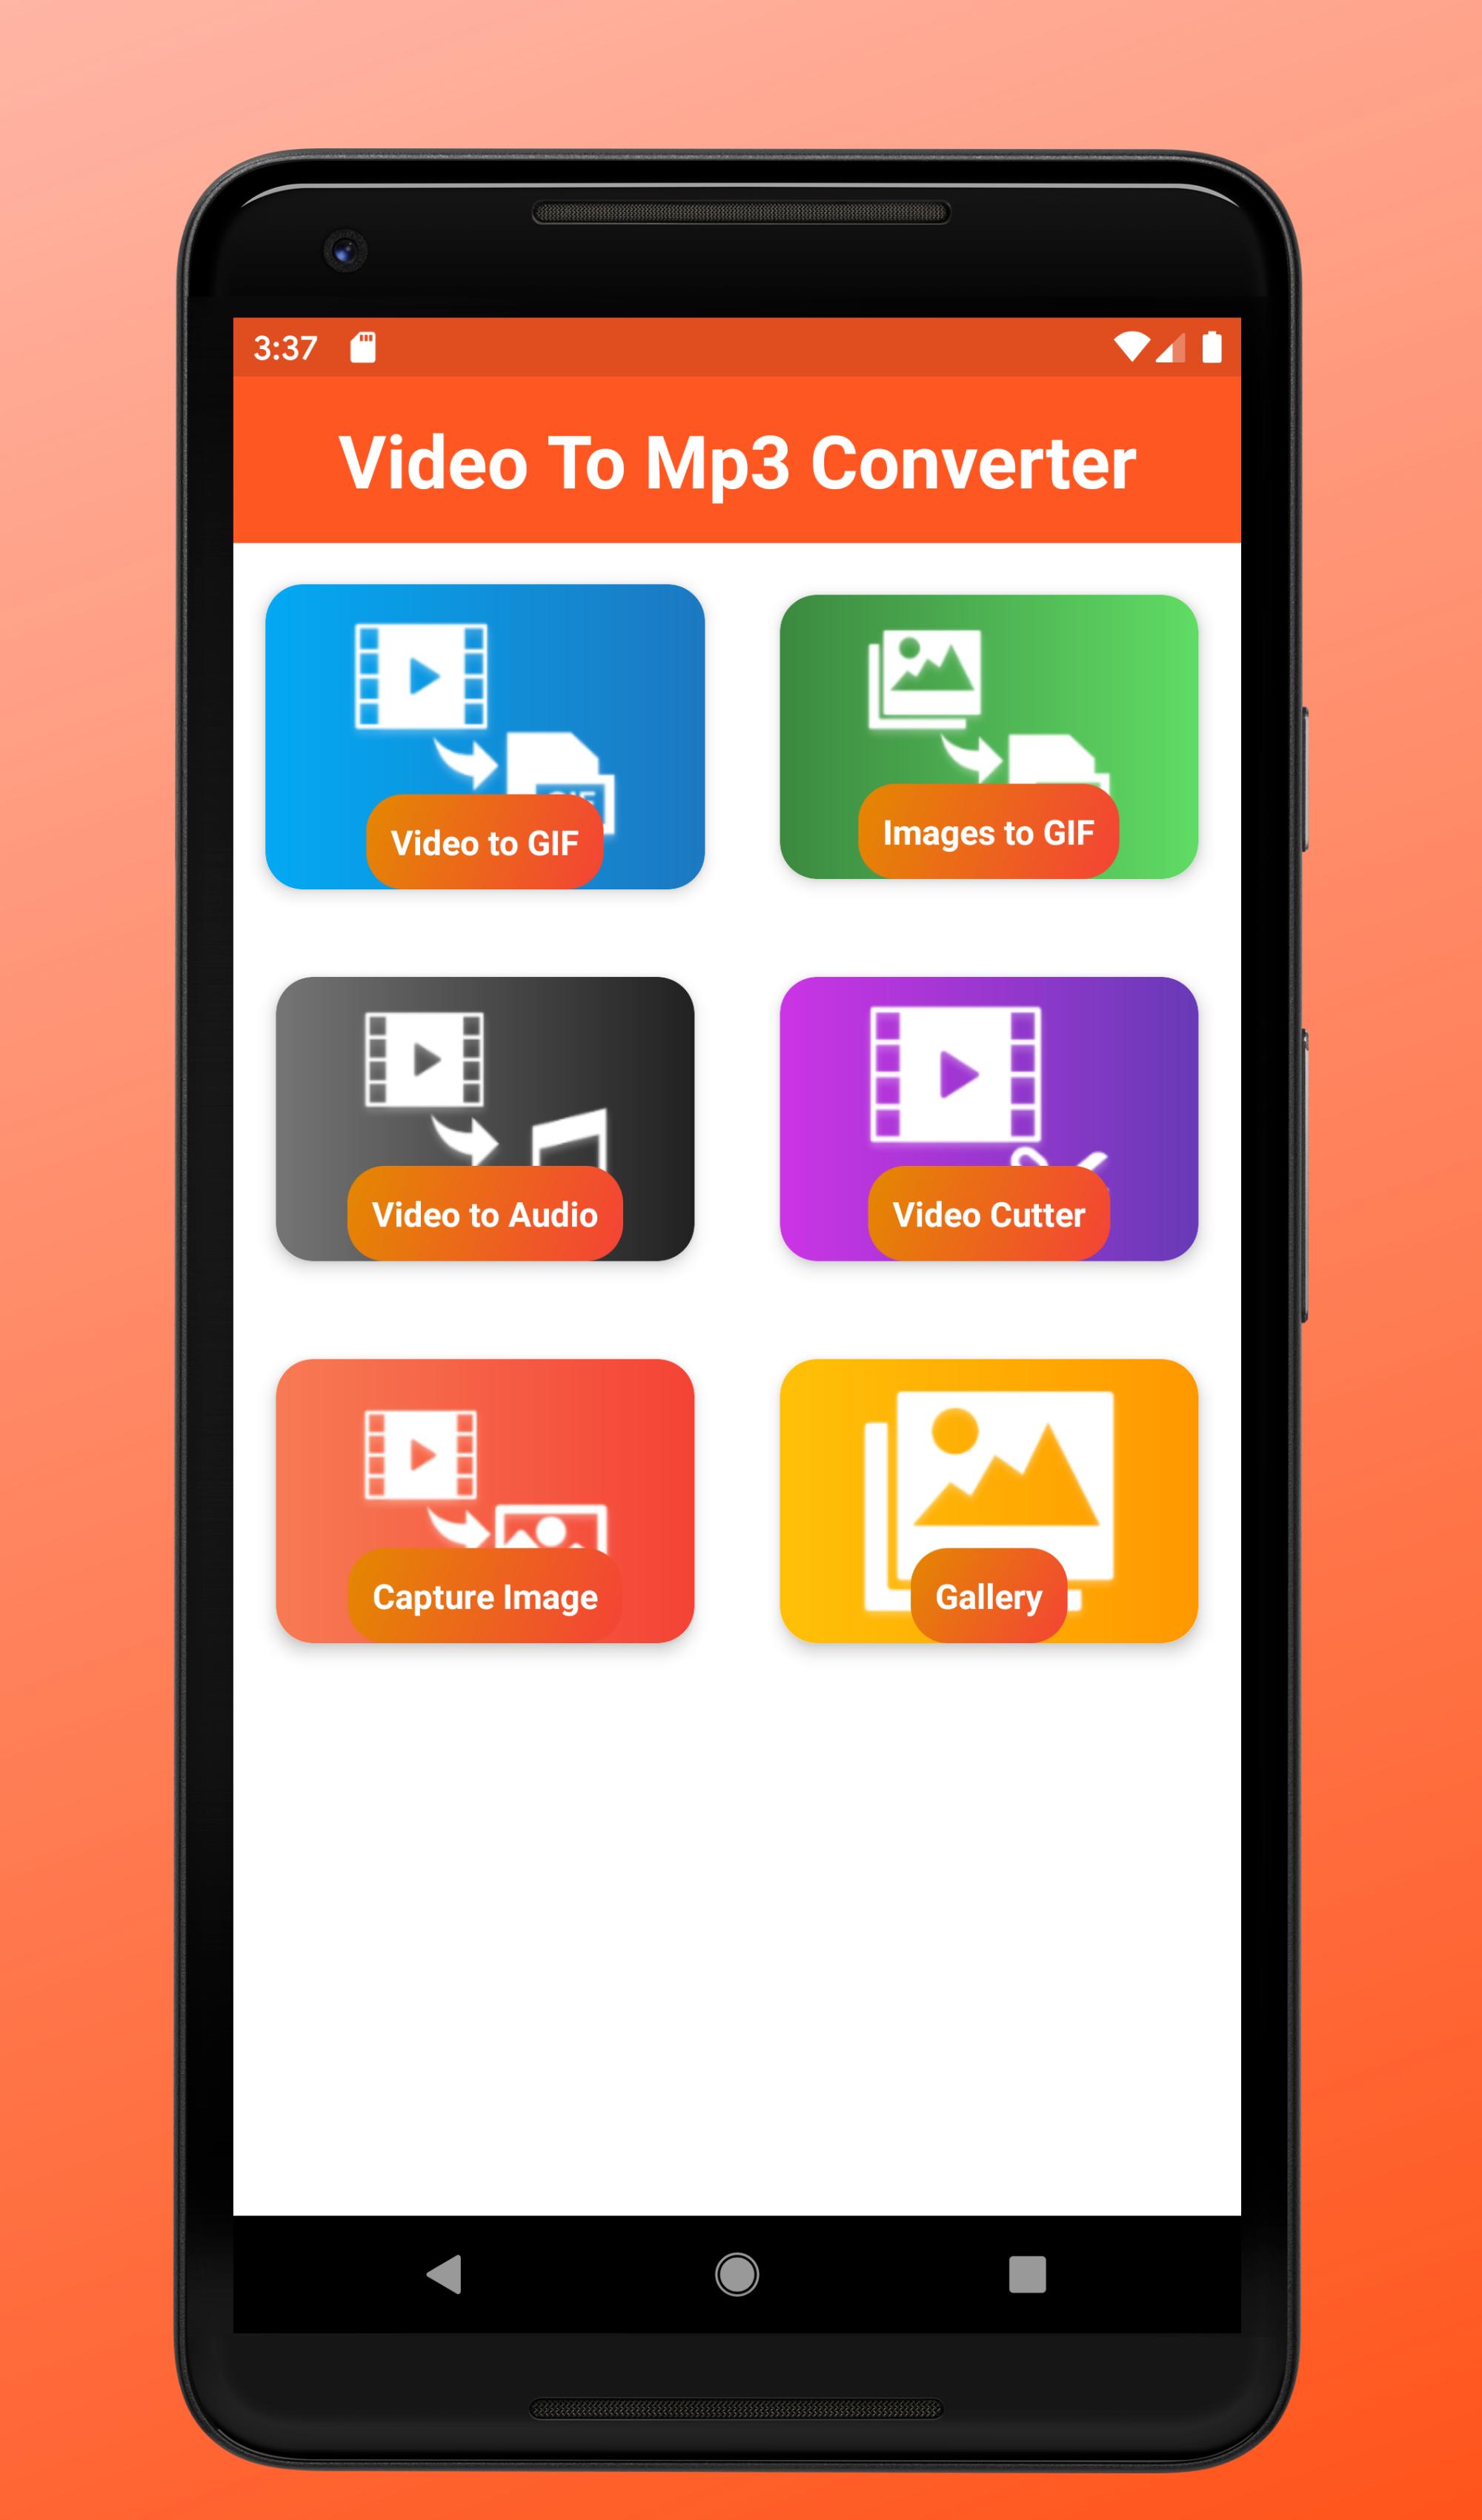 Video To Mp3 Converter-Video Cutter,GIF Maker for Android - APK Download